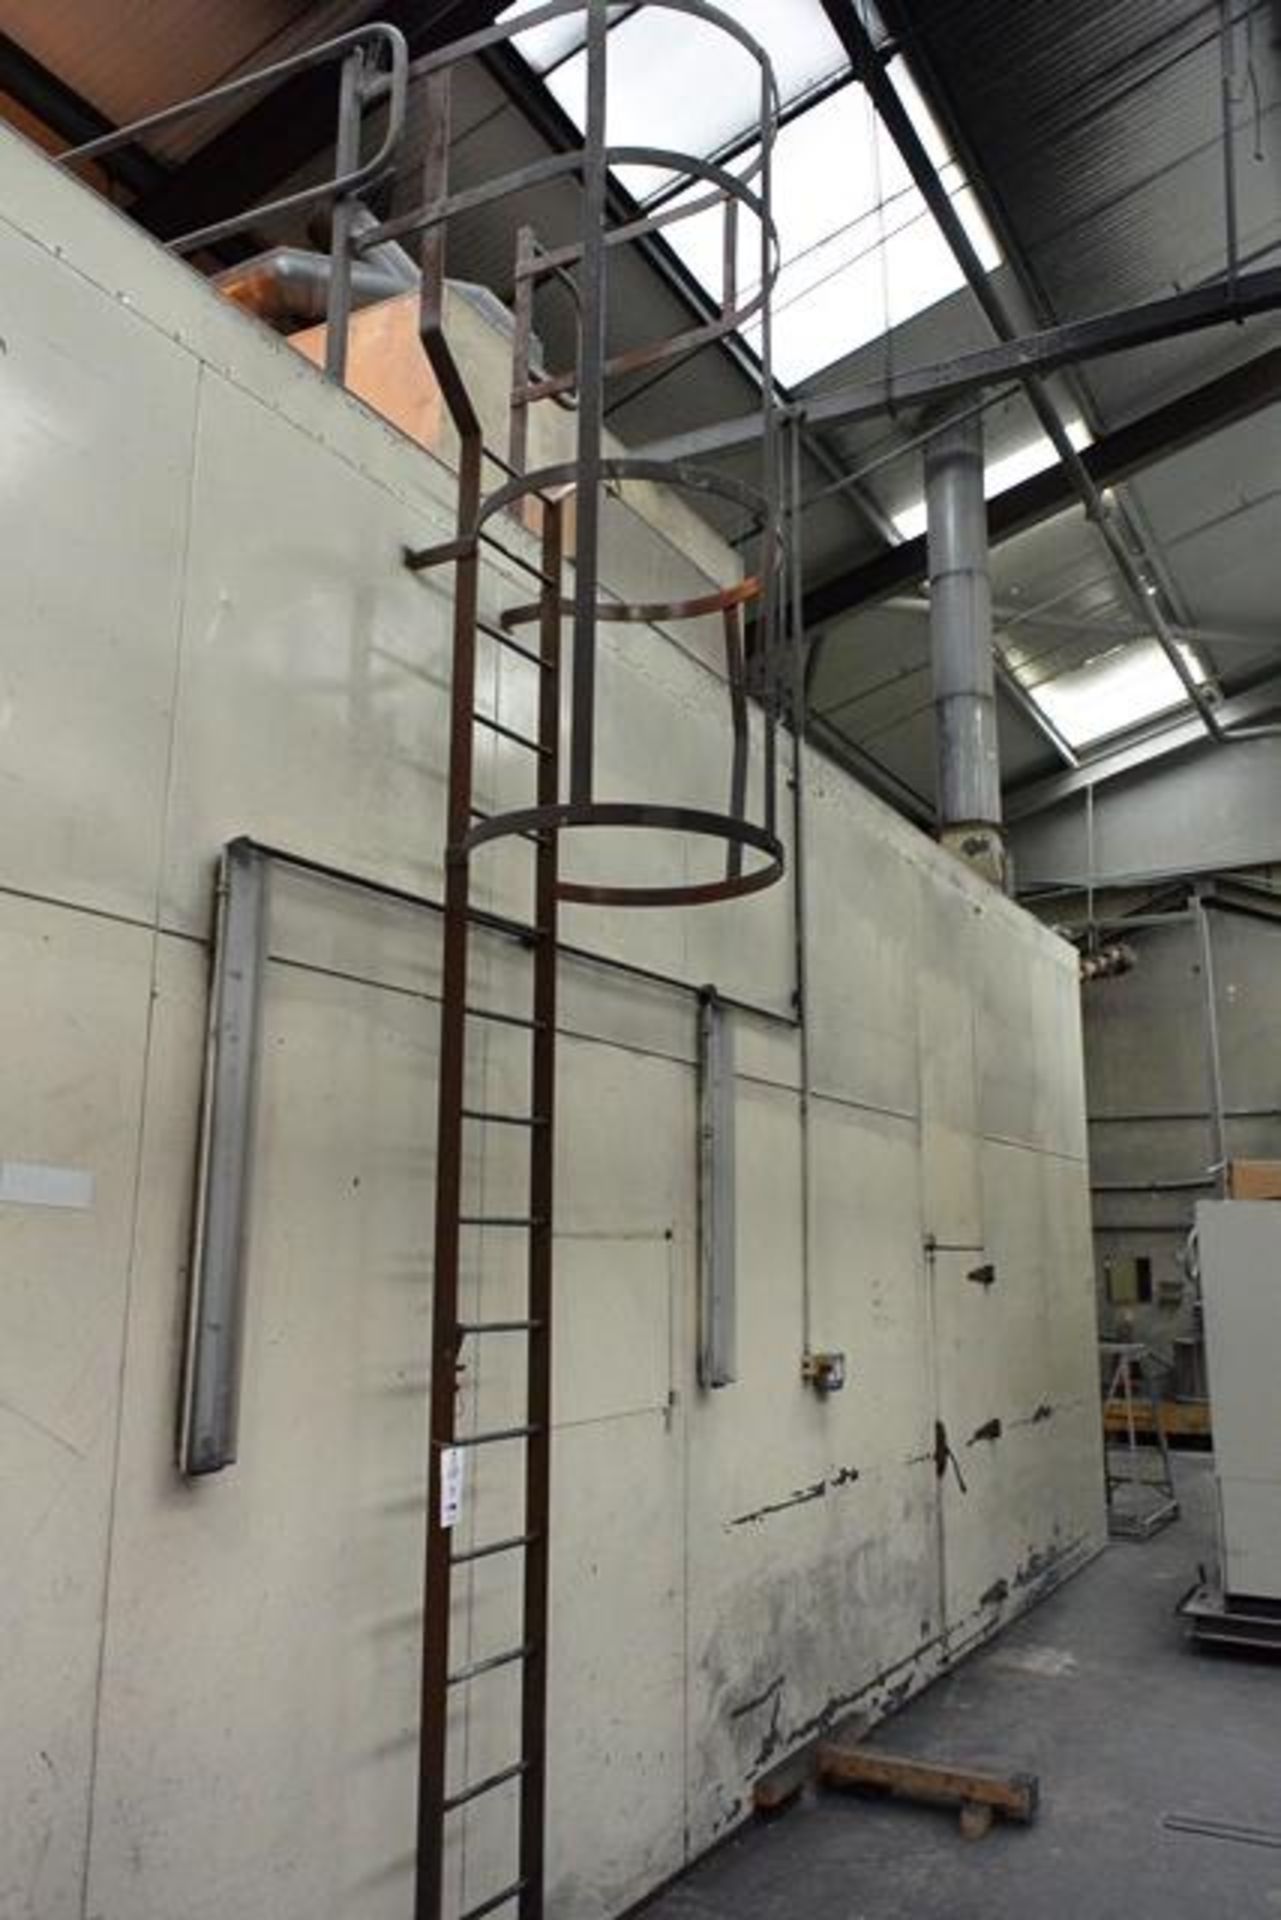 Thorid throughfeed 2-pass curing oven, approx dimensions 10 x 3m, with roof mounted fans and... - Image 3 of 8